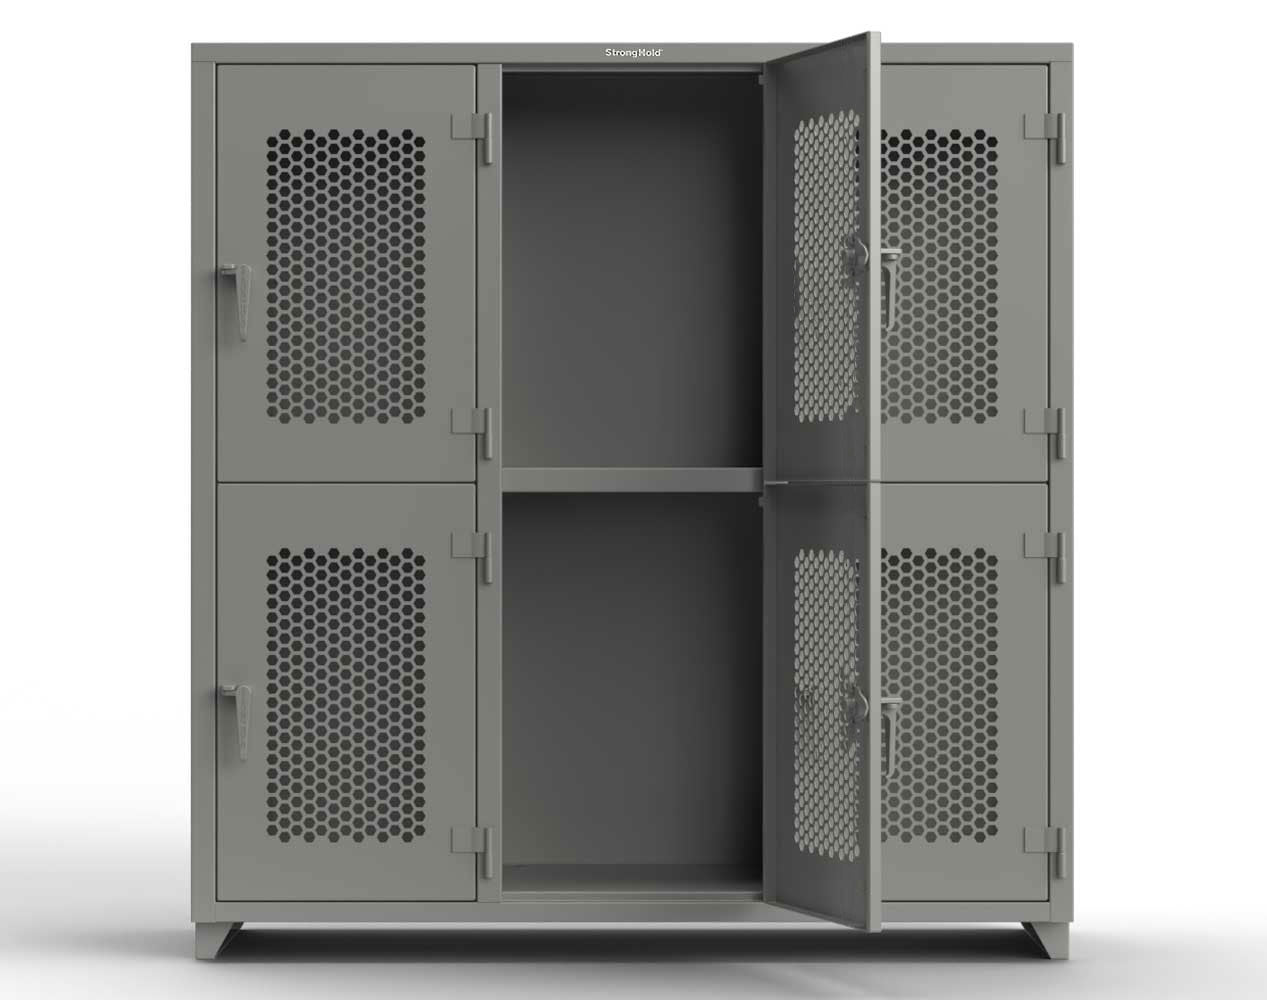 Extra Heavy Duty 14 GA Double-Tier Ventilated Locker, 6 Compartments - 72 in. W x 24 in. D x 75 in. H